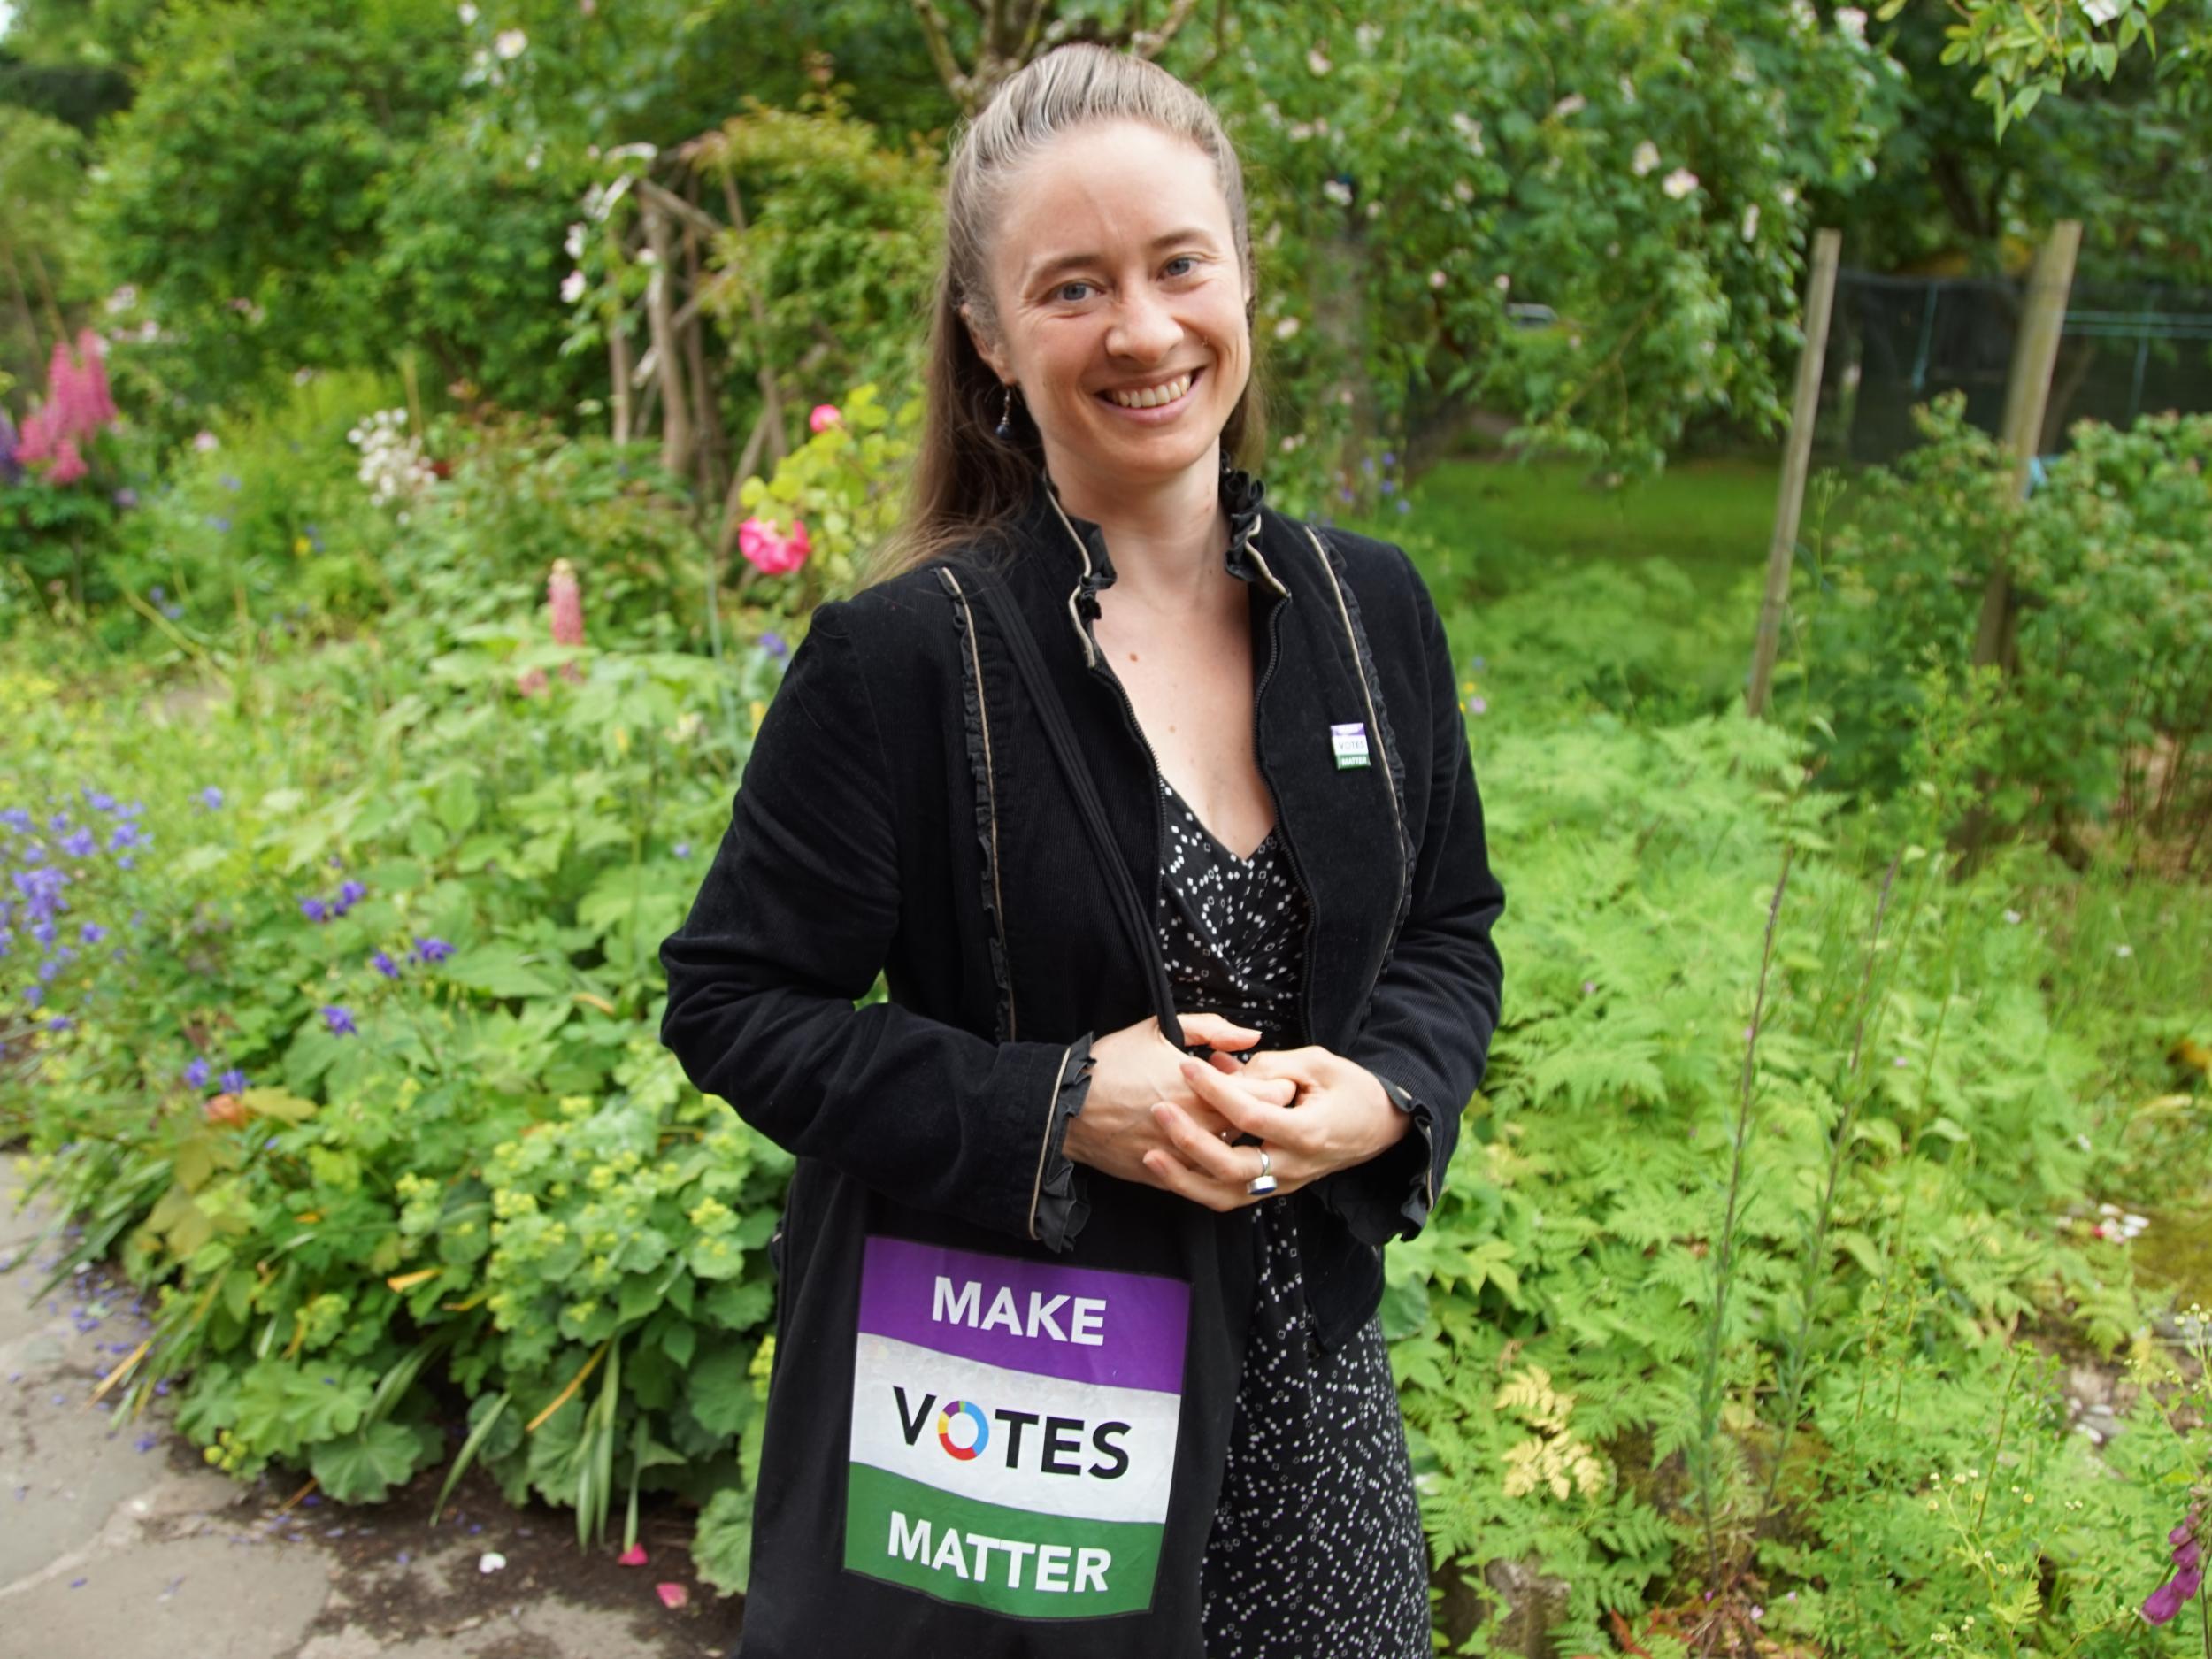 Klina Jordan is co-director and facilitator at Make Votes Matter, a non-profit venture that aims to change the voting system in the UK from first past the post to proportional representation by 2021.